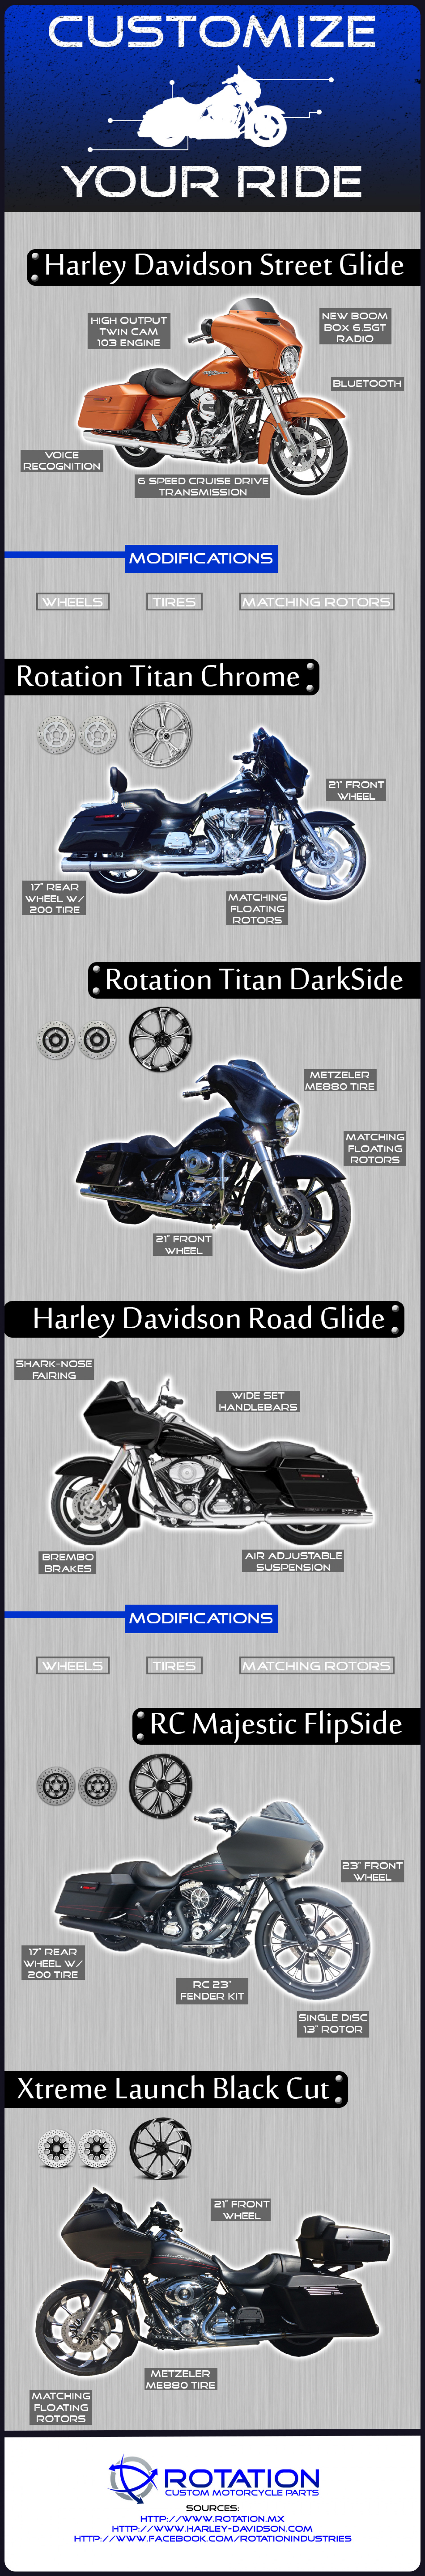 Customize Your Ride Infographic